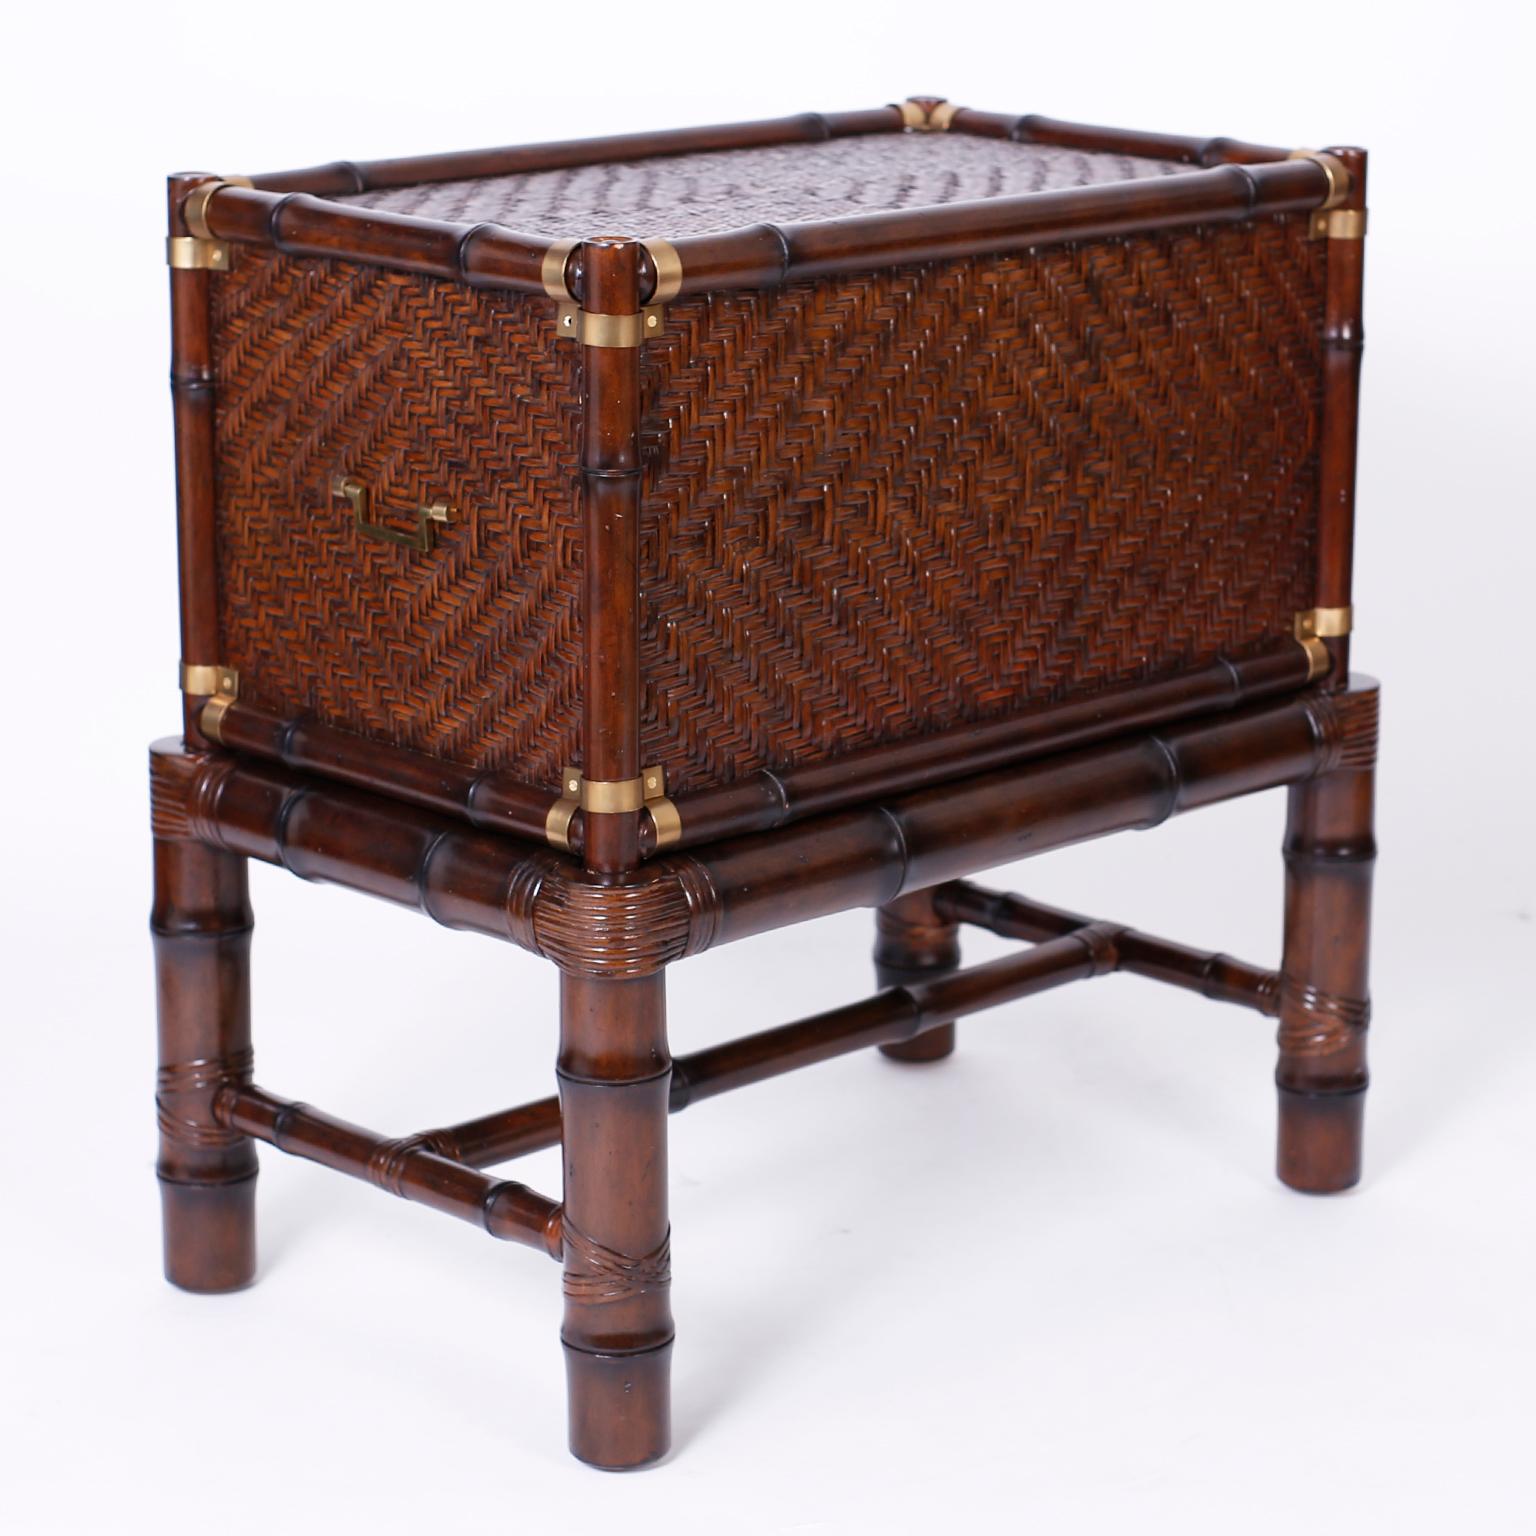 20th Century Pair of Faux Bamboo and Rattan British Colonial Chests on Stands or Tables